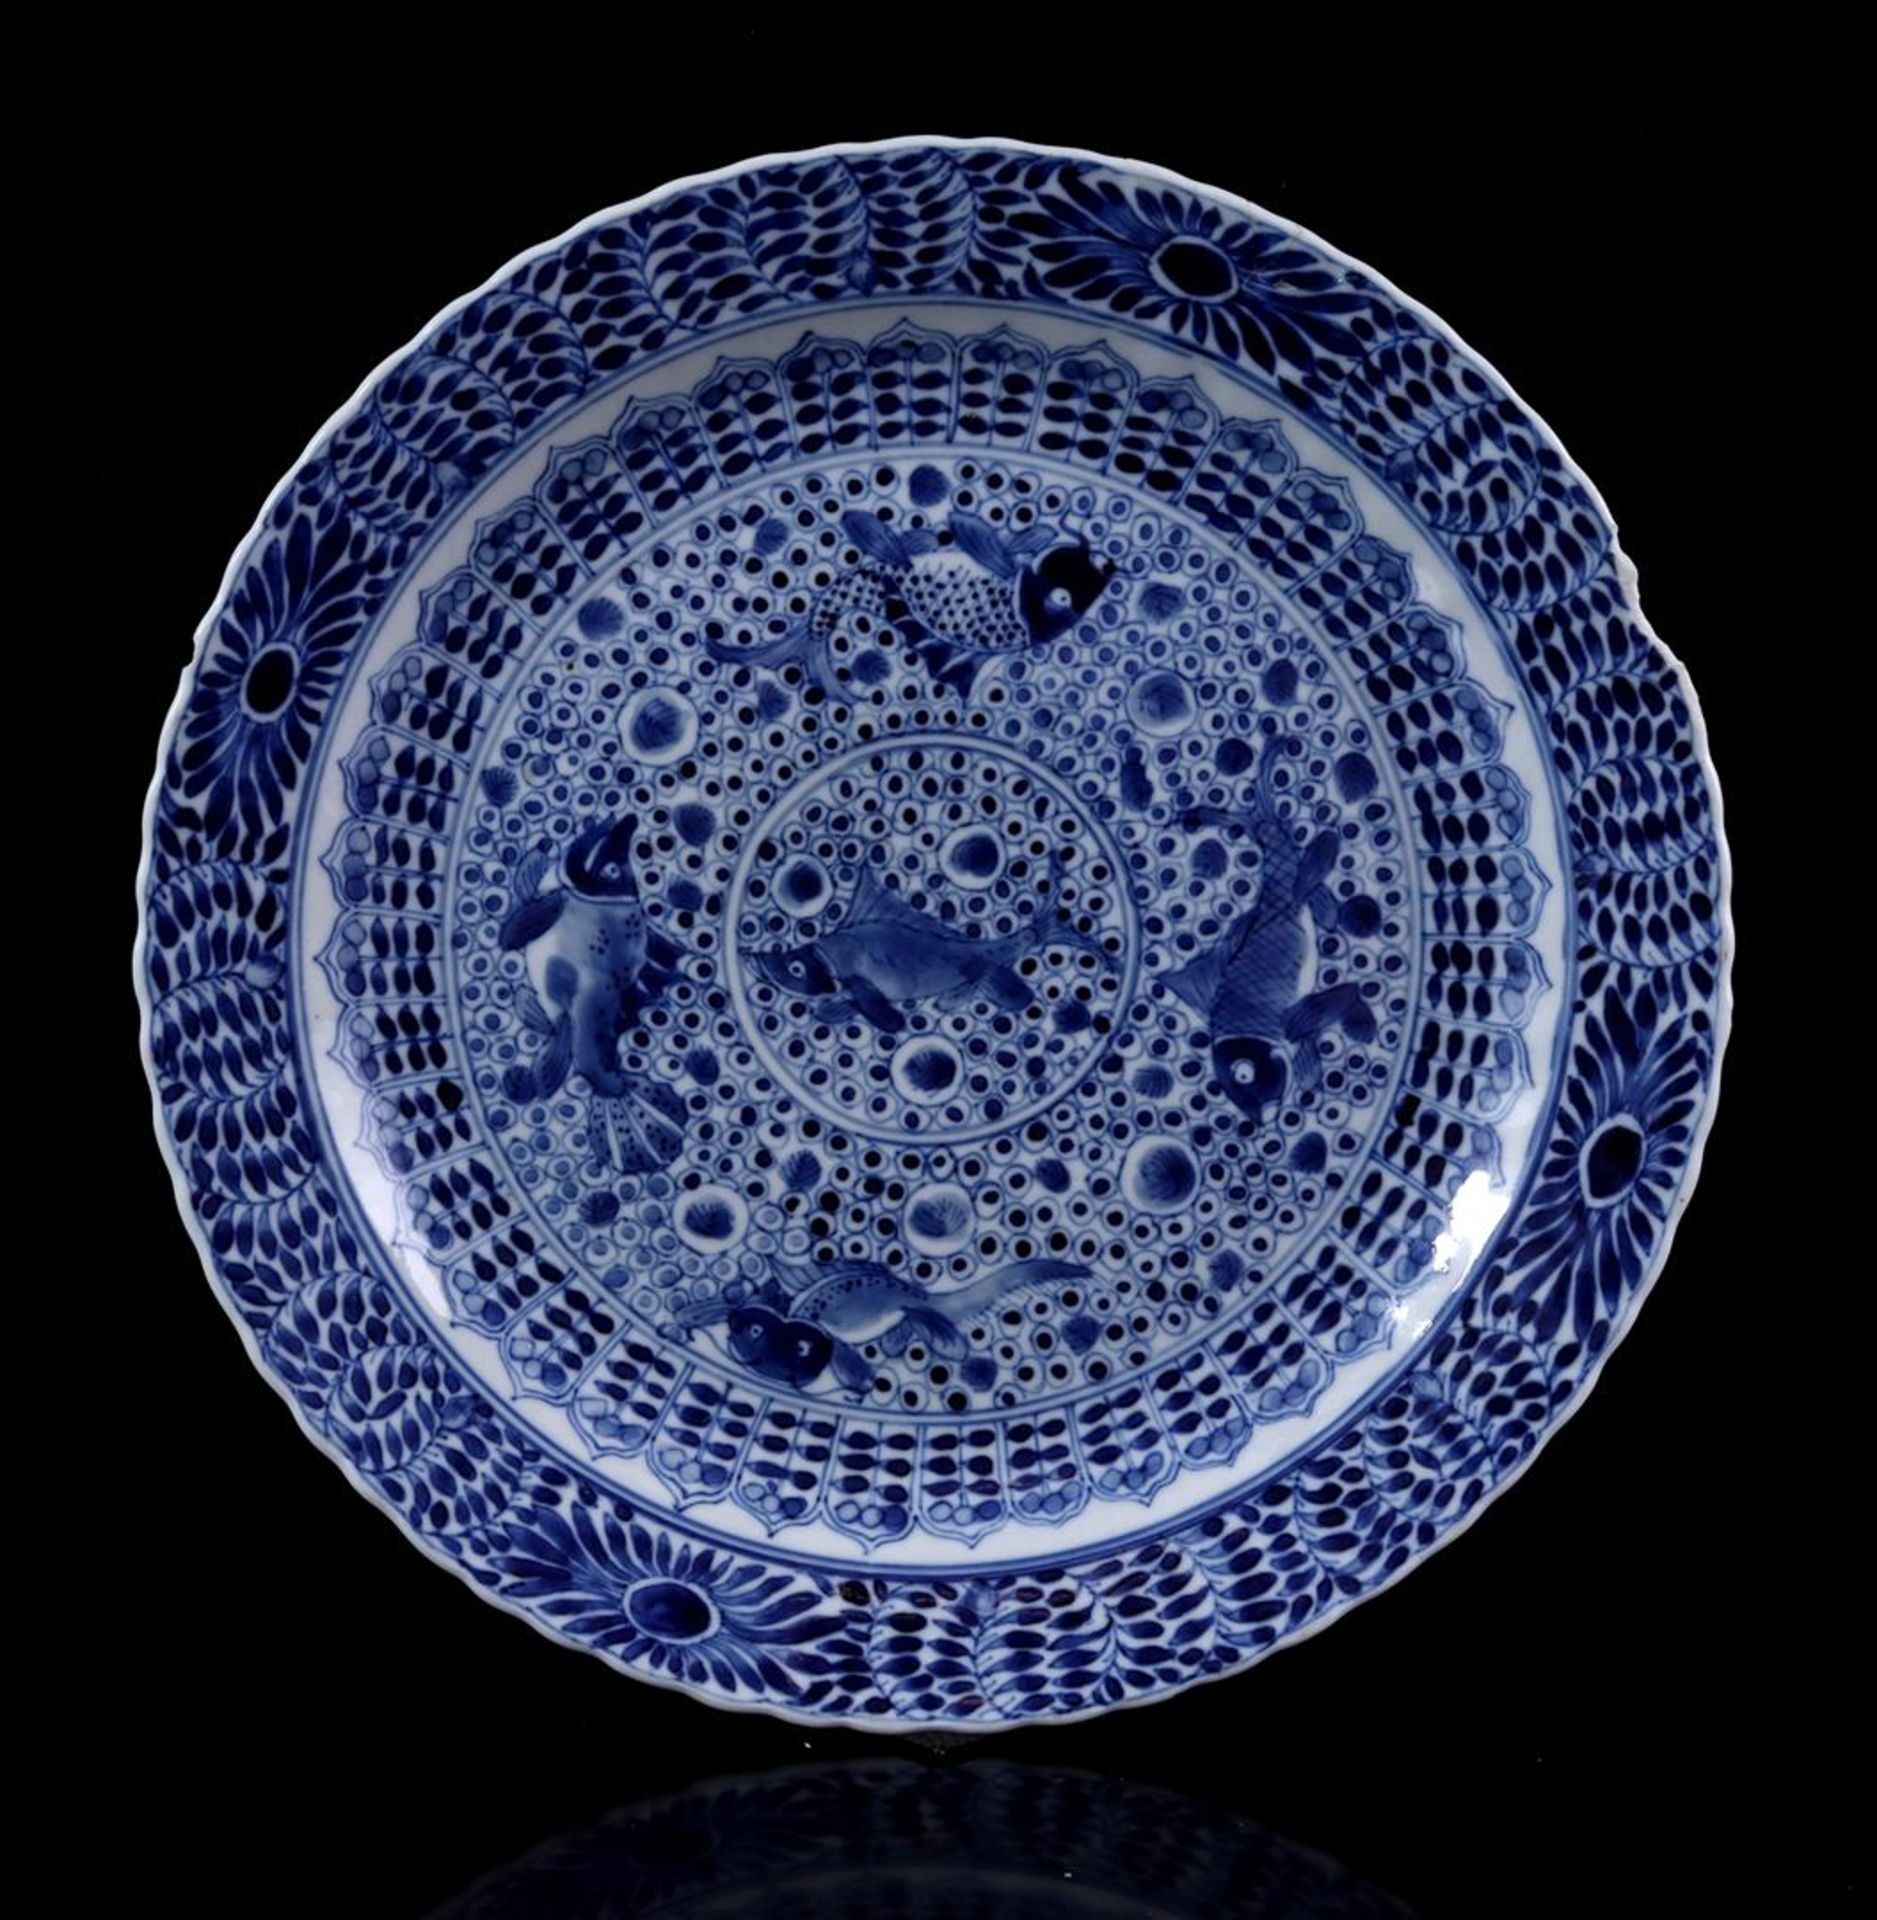 Porcelain dish with blue and white fish décor